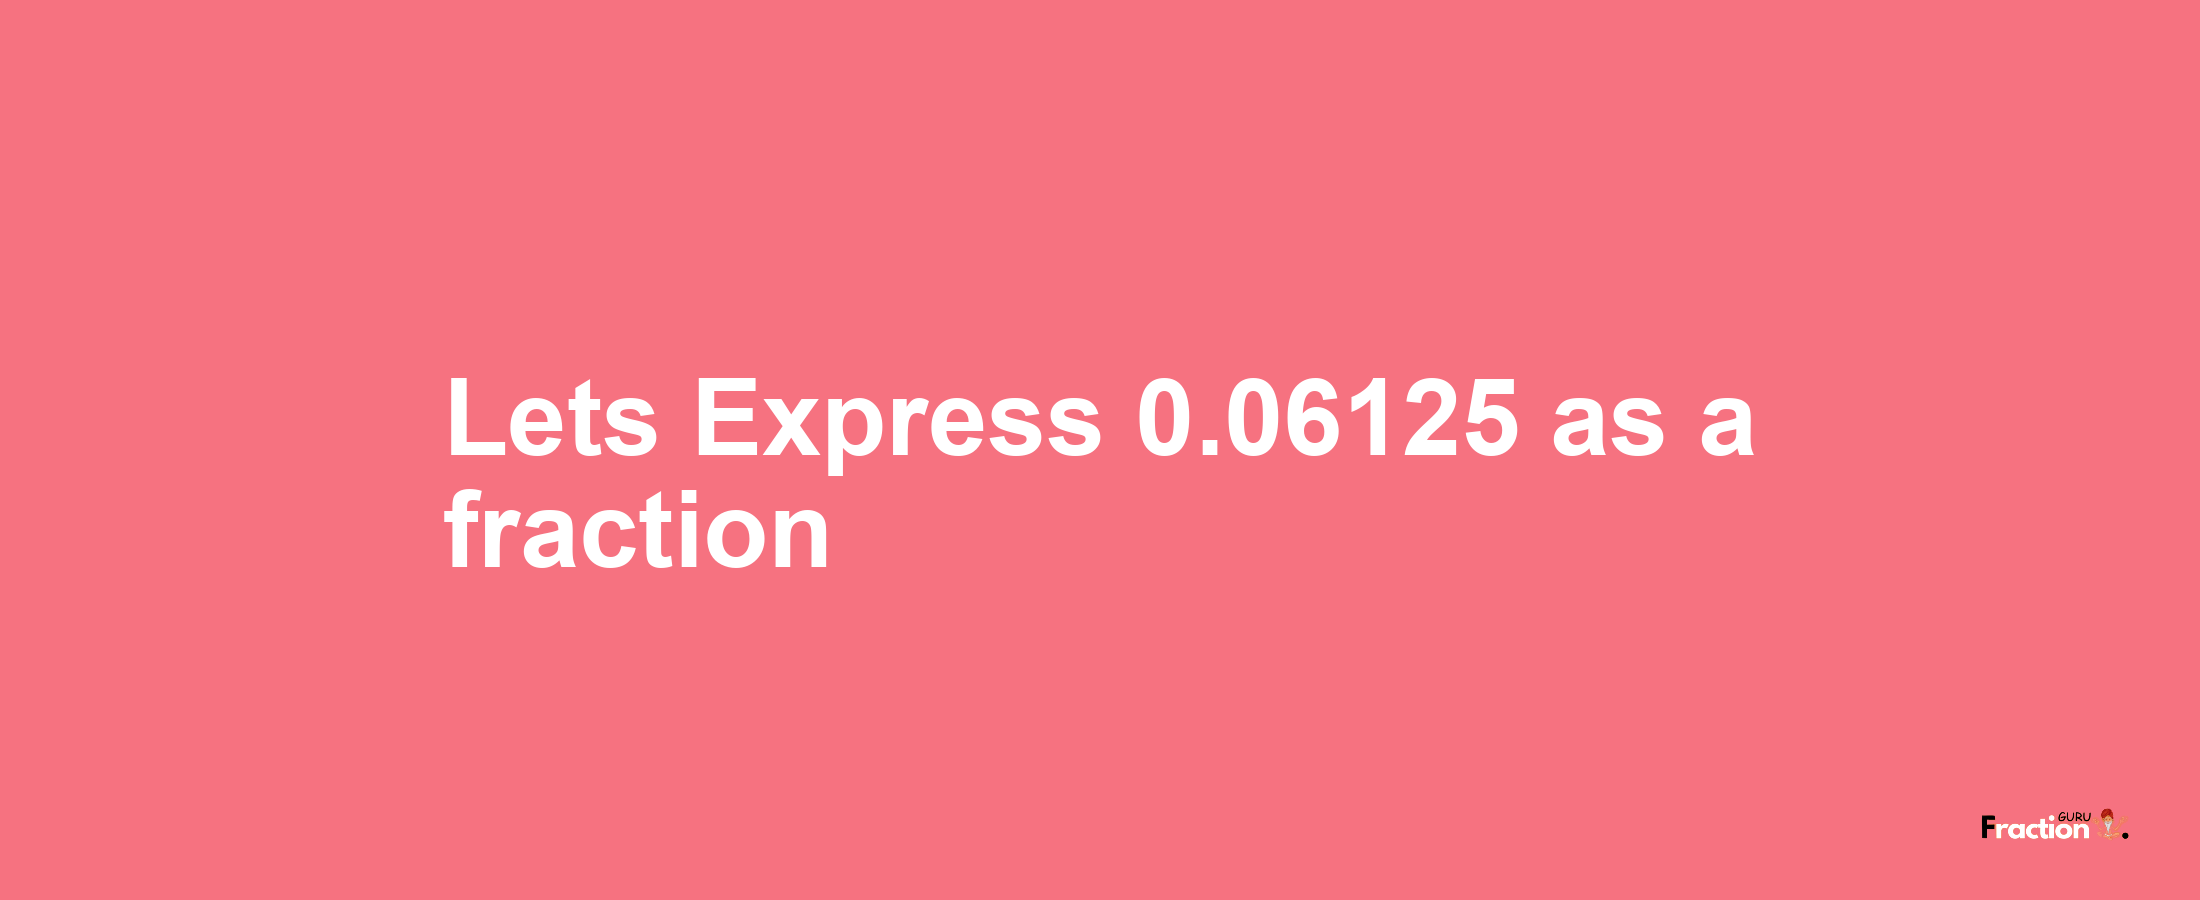 Lets Express 0.06125 as afraction